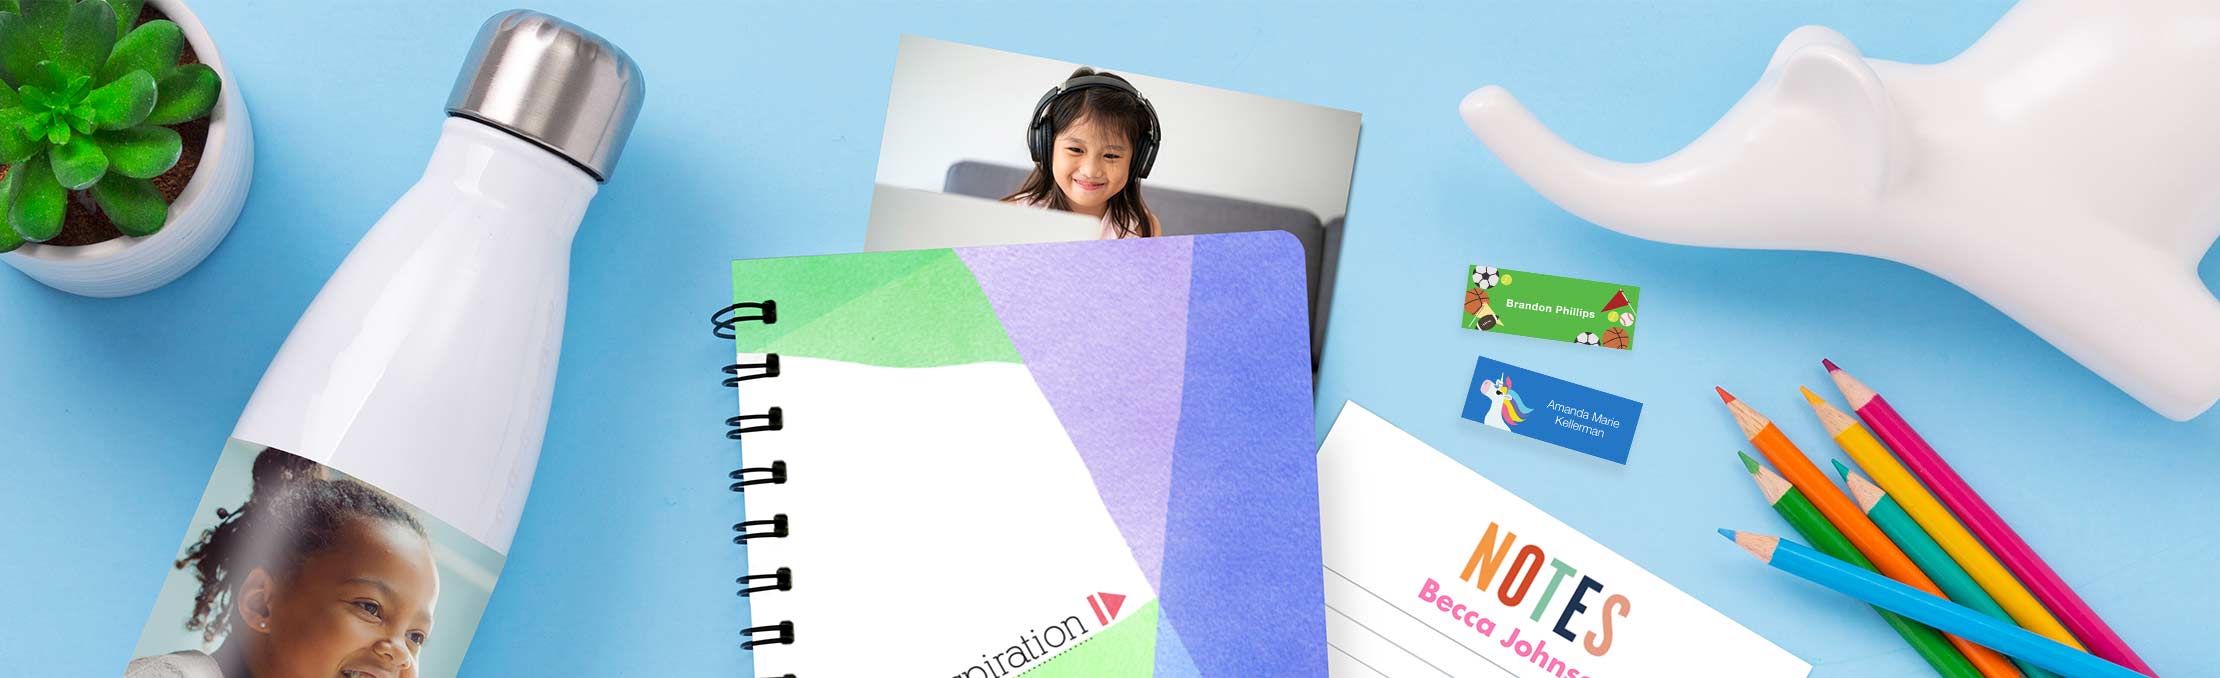 Personalize Your School Supplies